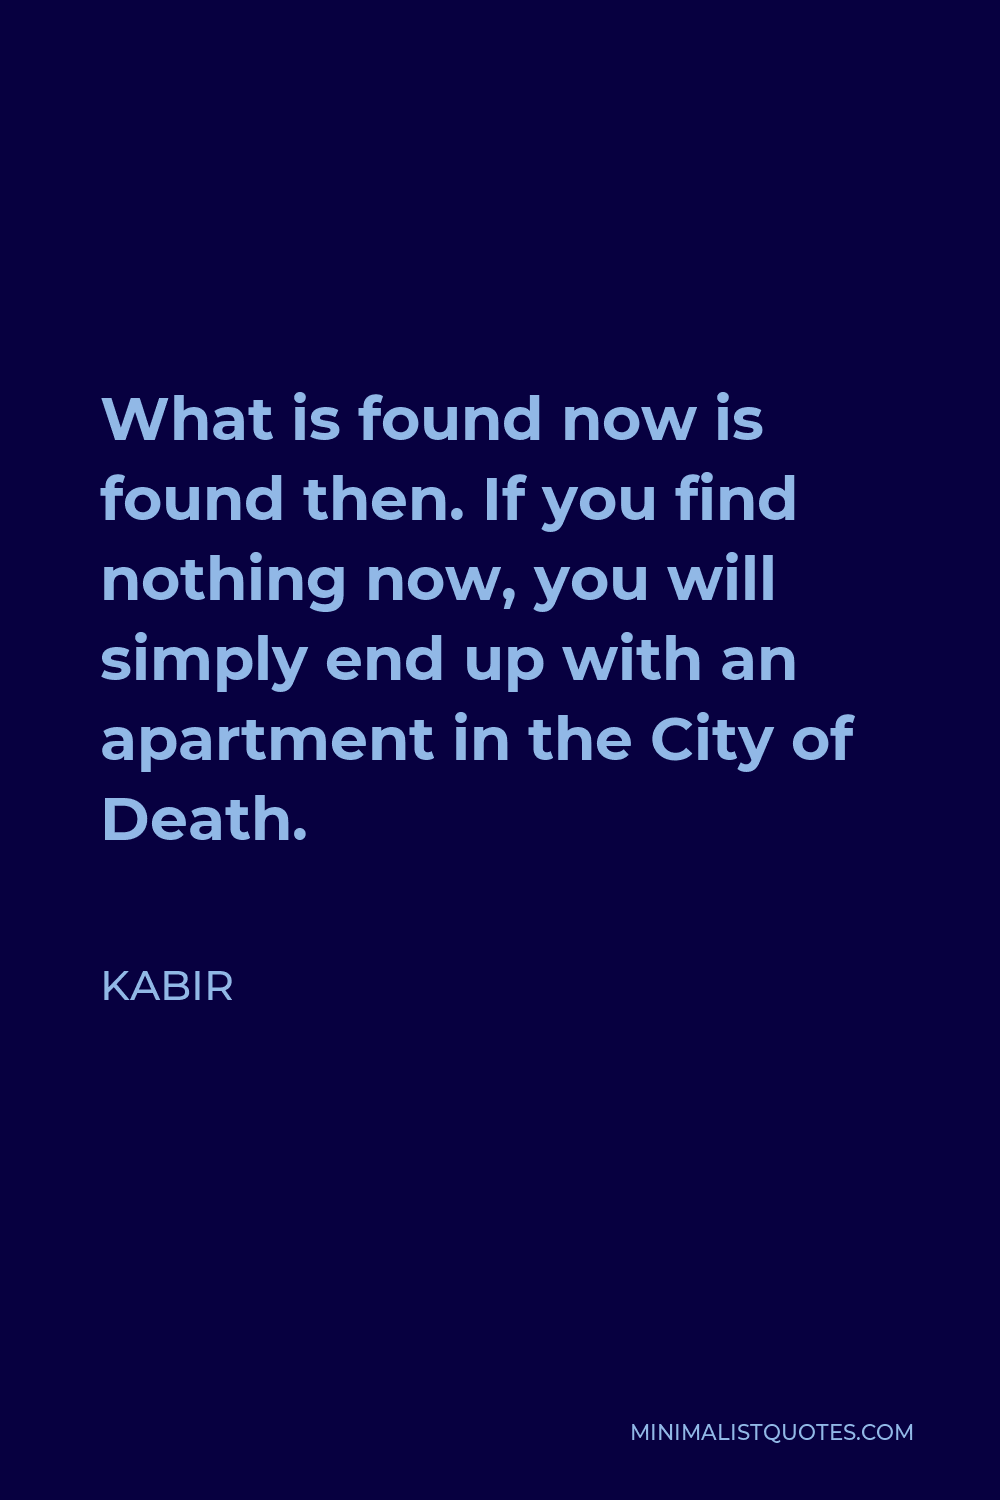 Kabir Quote - What is found now is found then. If you find nothing now, you will simply end up with an apartment in the City of Death.